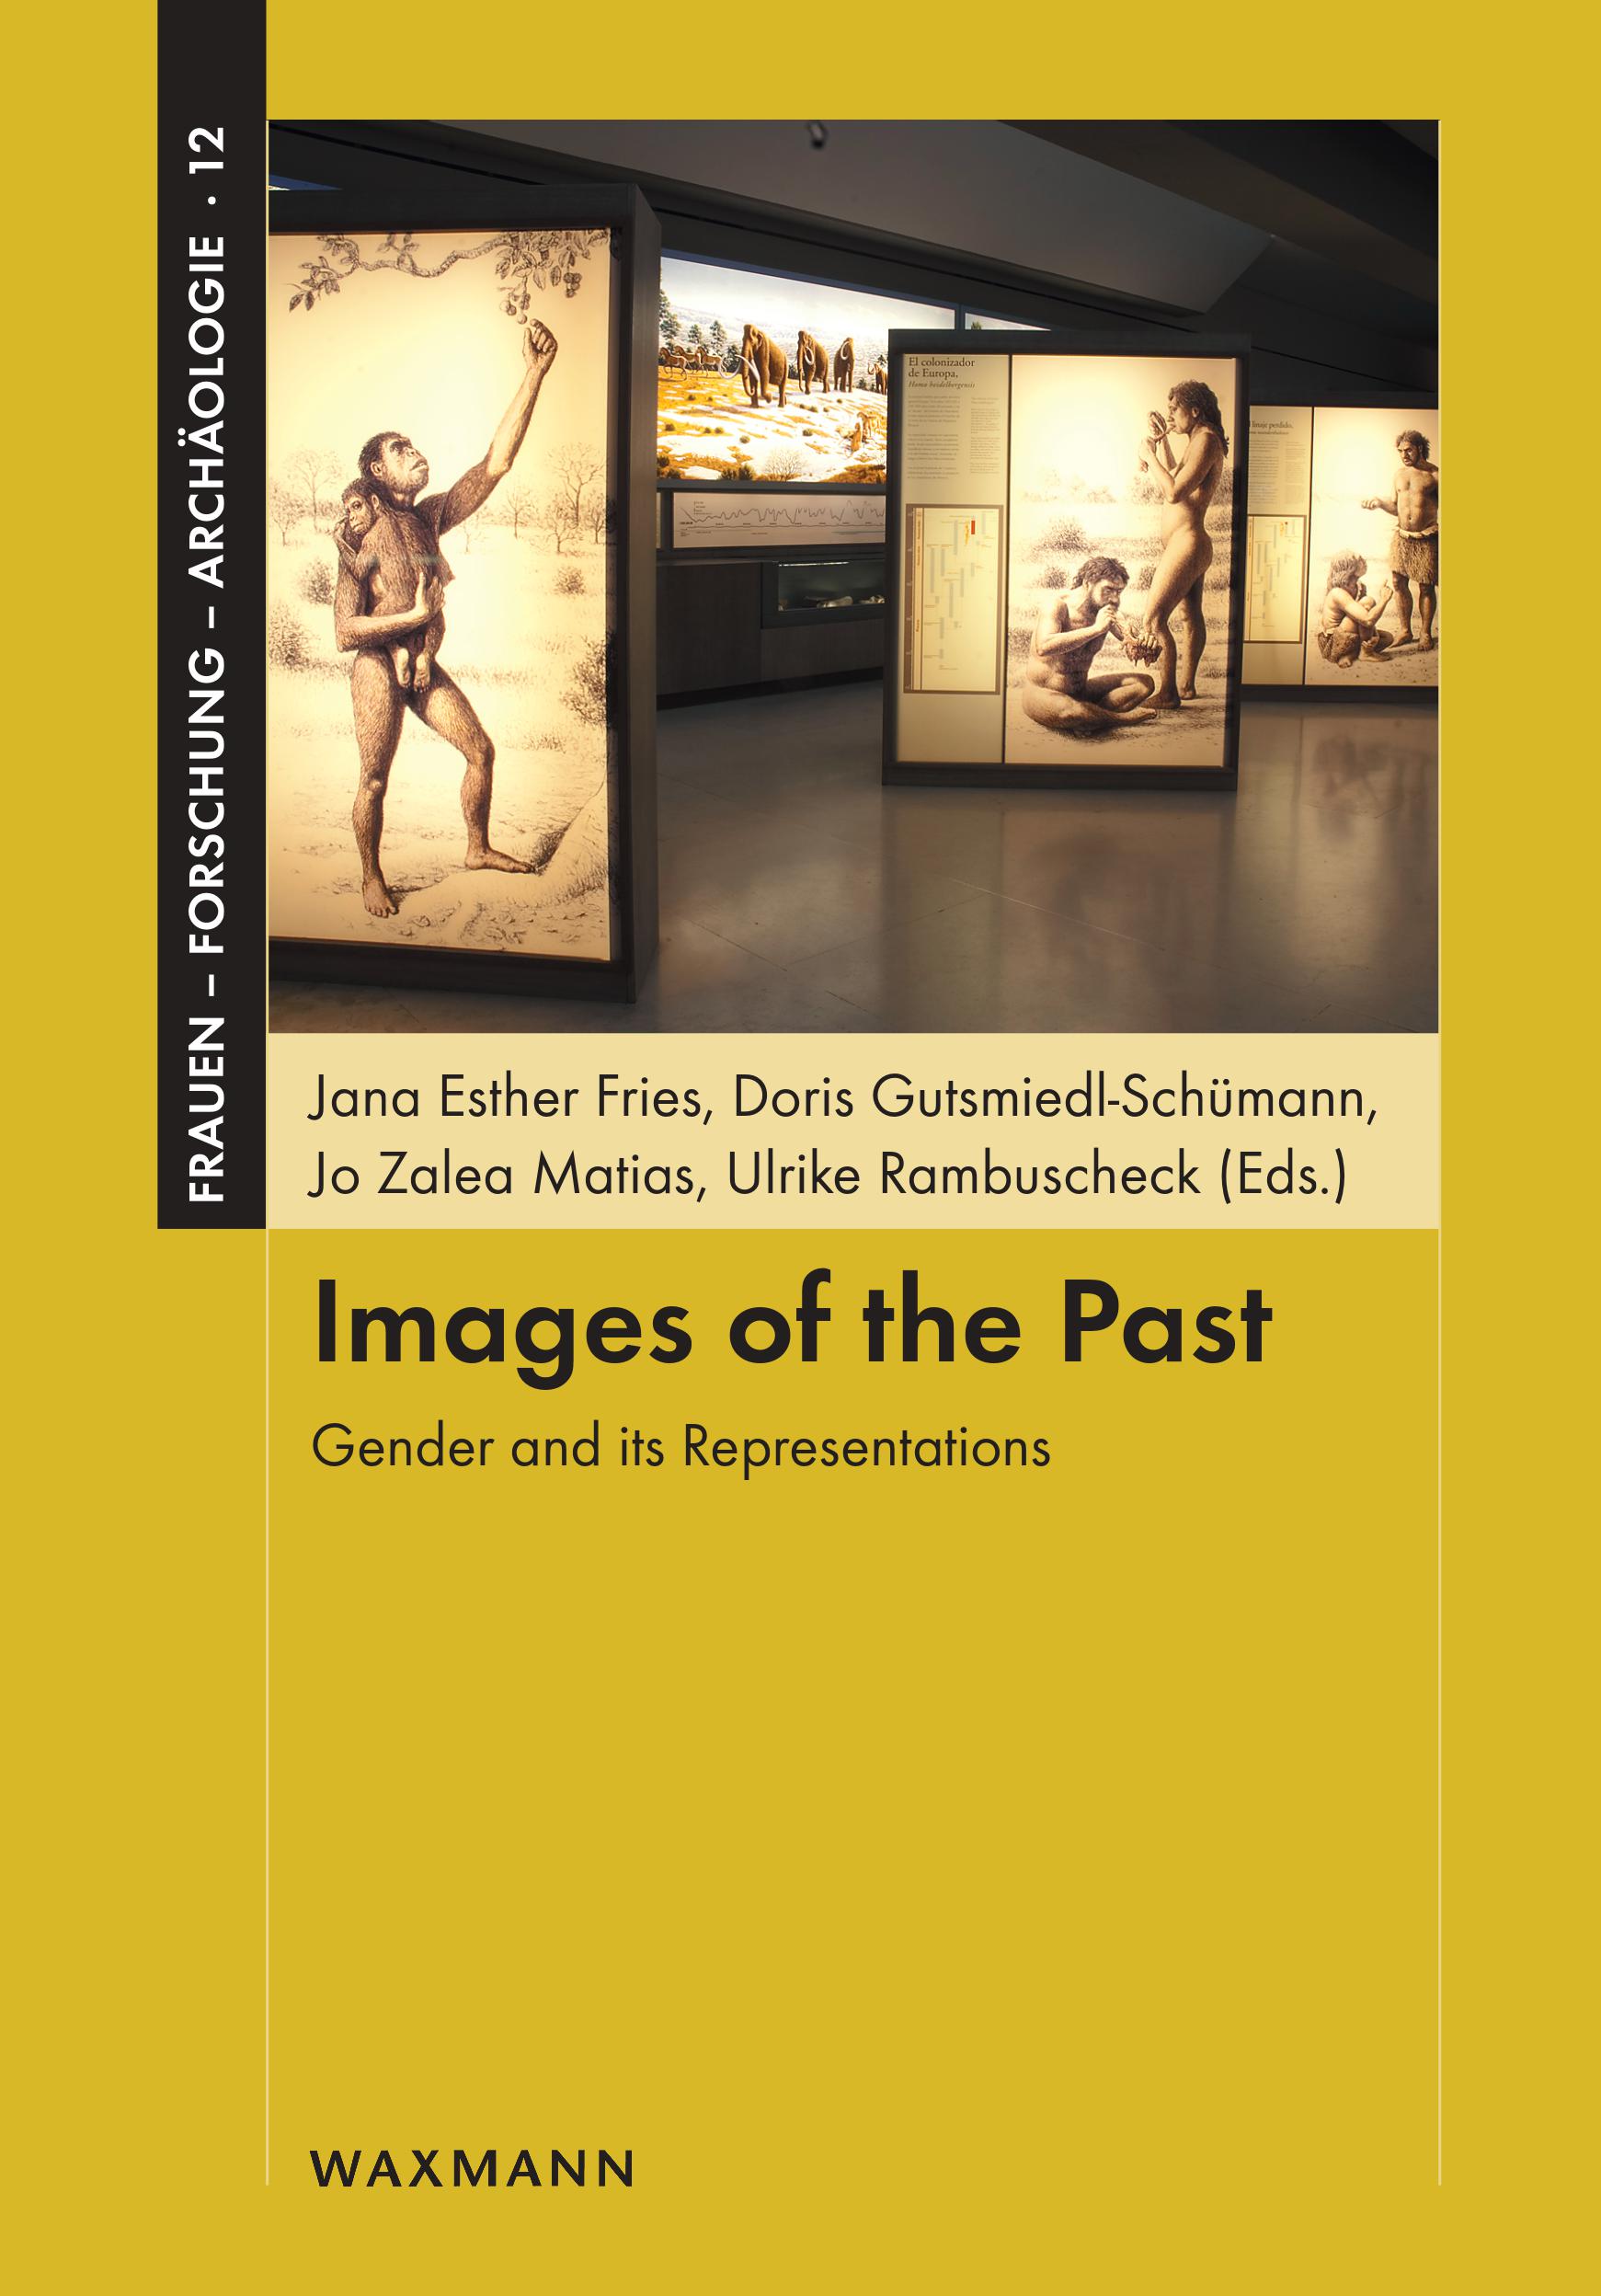 Images of the Past. Gender and its Representations